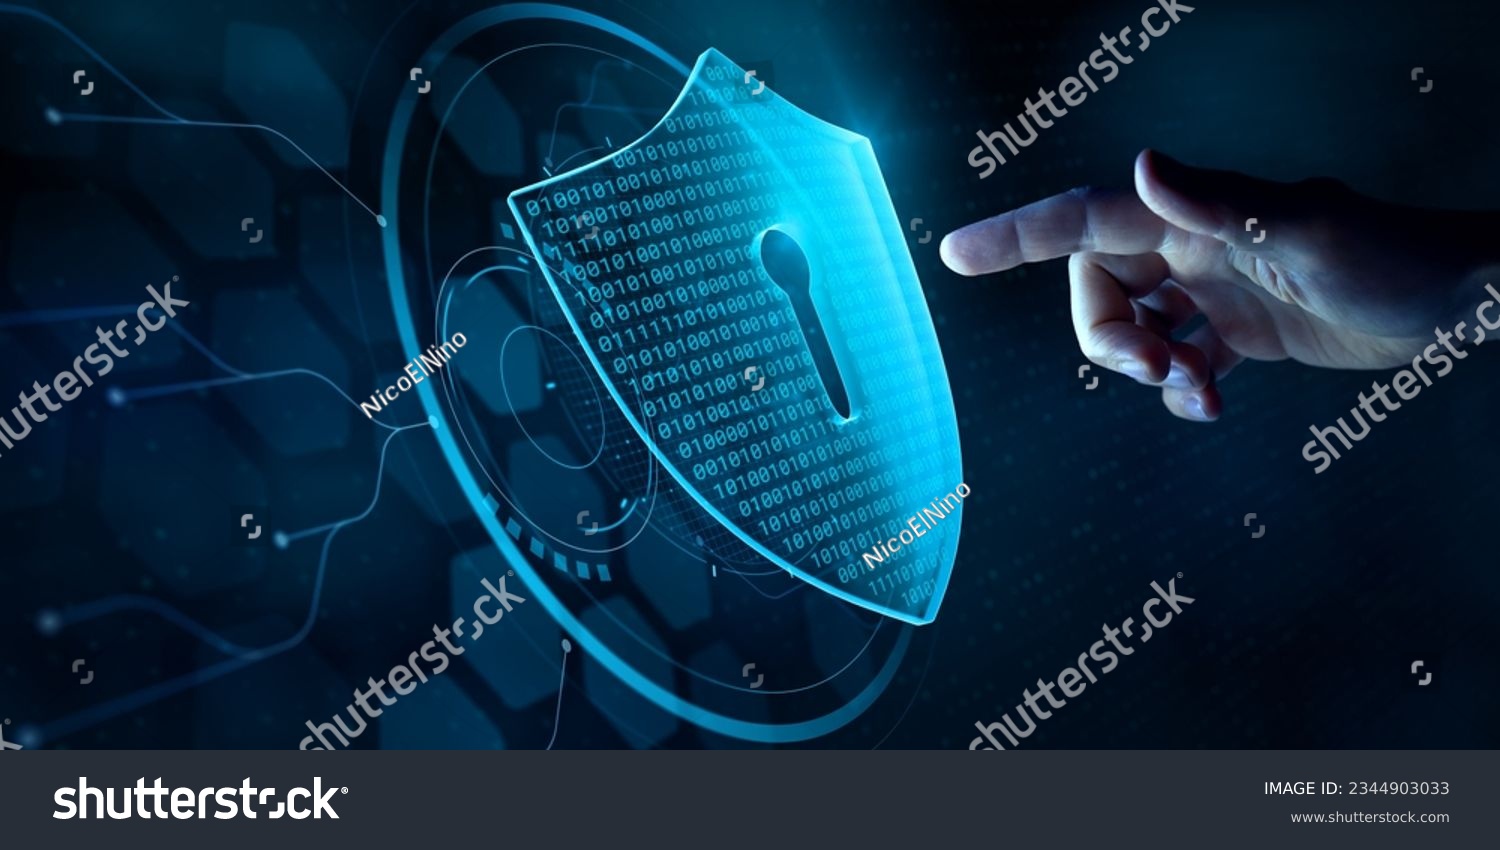 Cyber security and data protection on internet. Person touching virtual shield, secure access, encrypted connection. Password protected system and storage. Cybersecurity technology. #2344903033